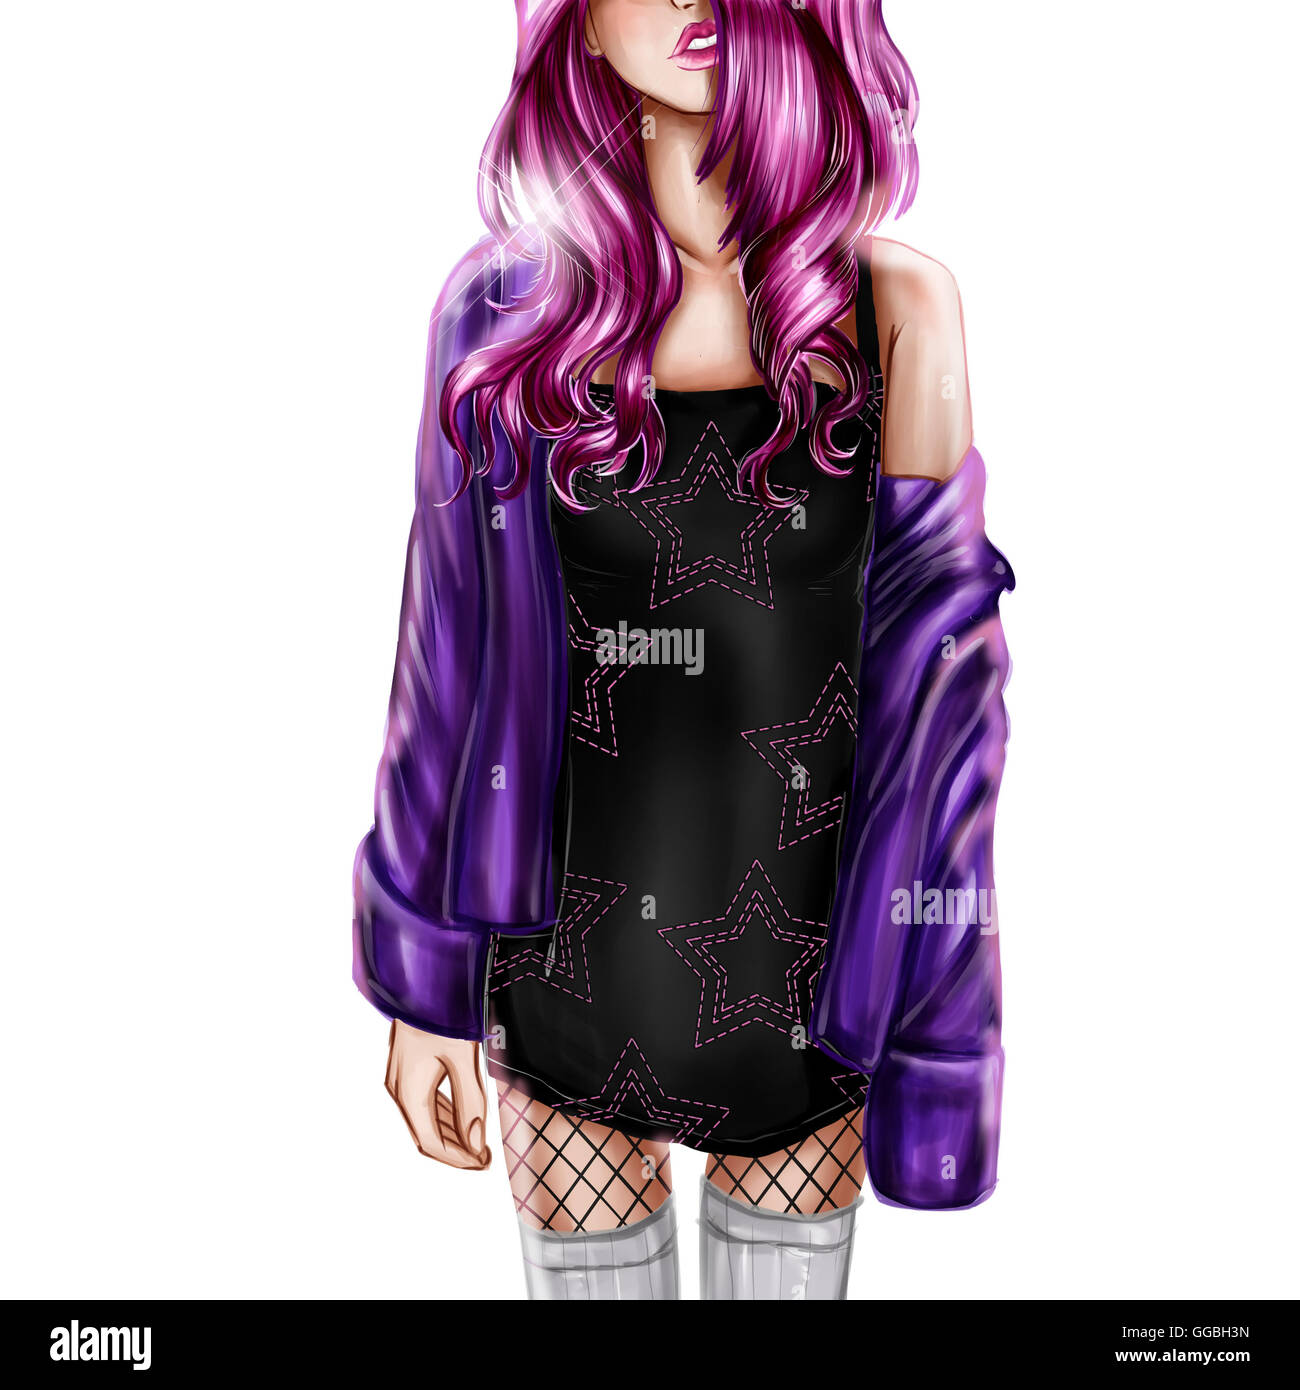 Digital Illustration of girl with pink hair Stock Photo